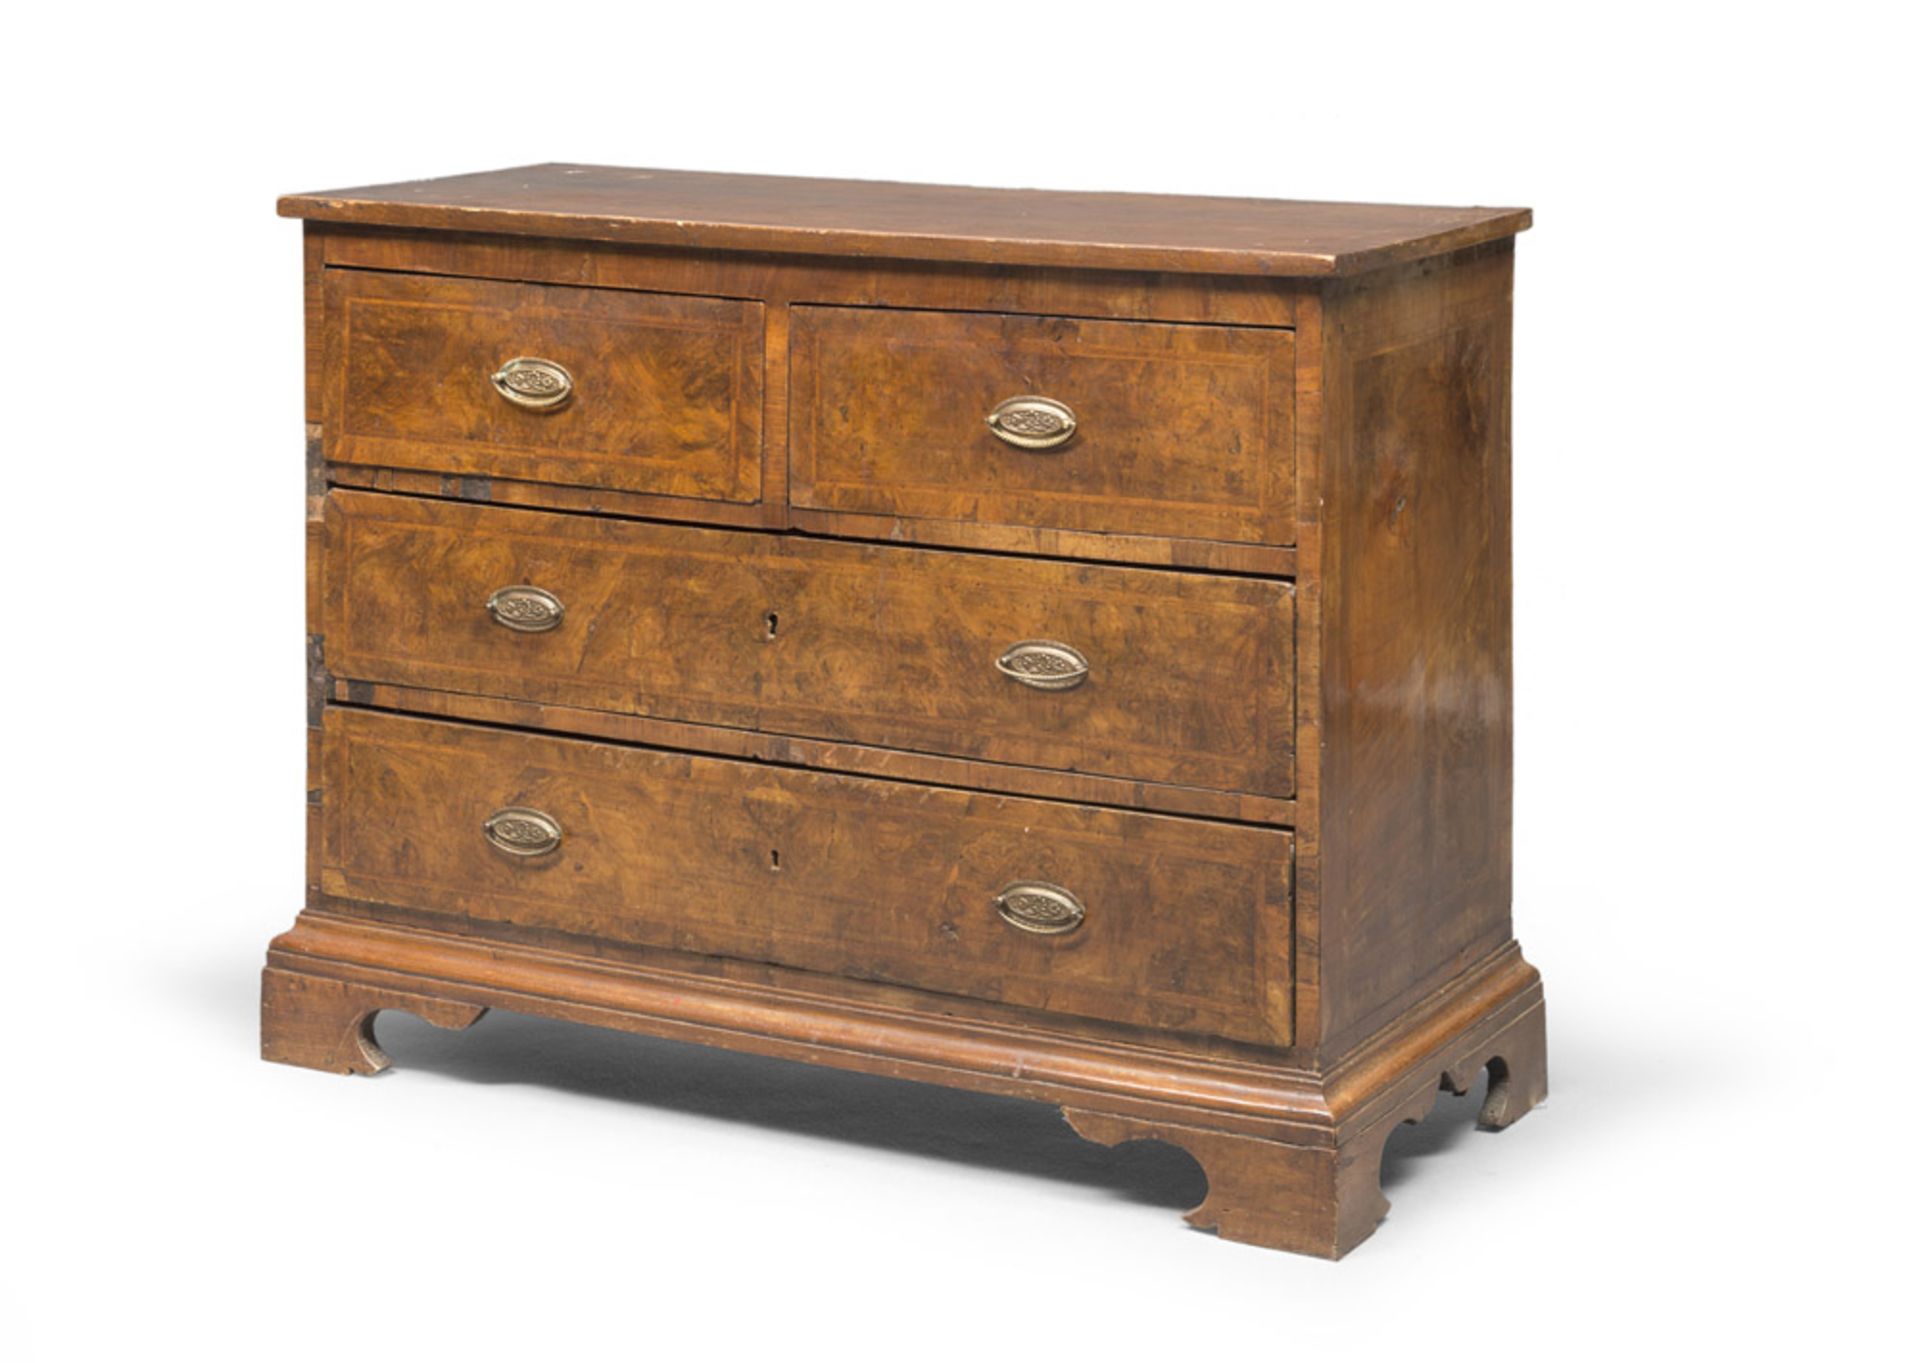 Olive-tree with thread in bois de rose Commode, probably England, antique elements. Measures cm.